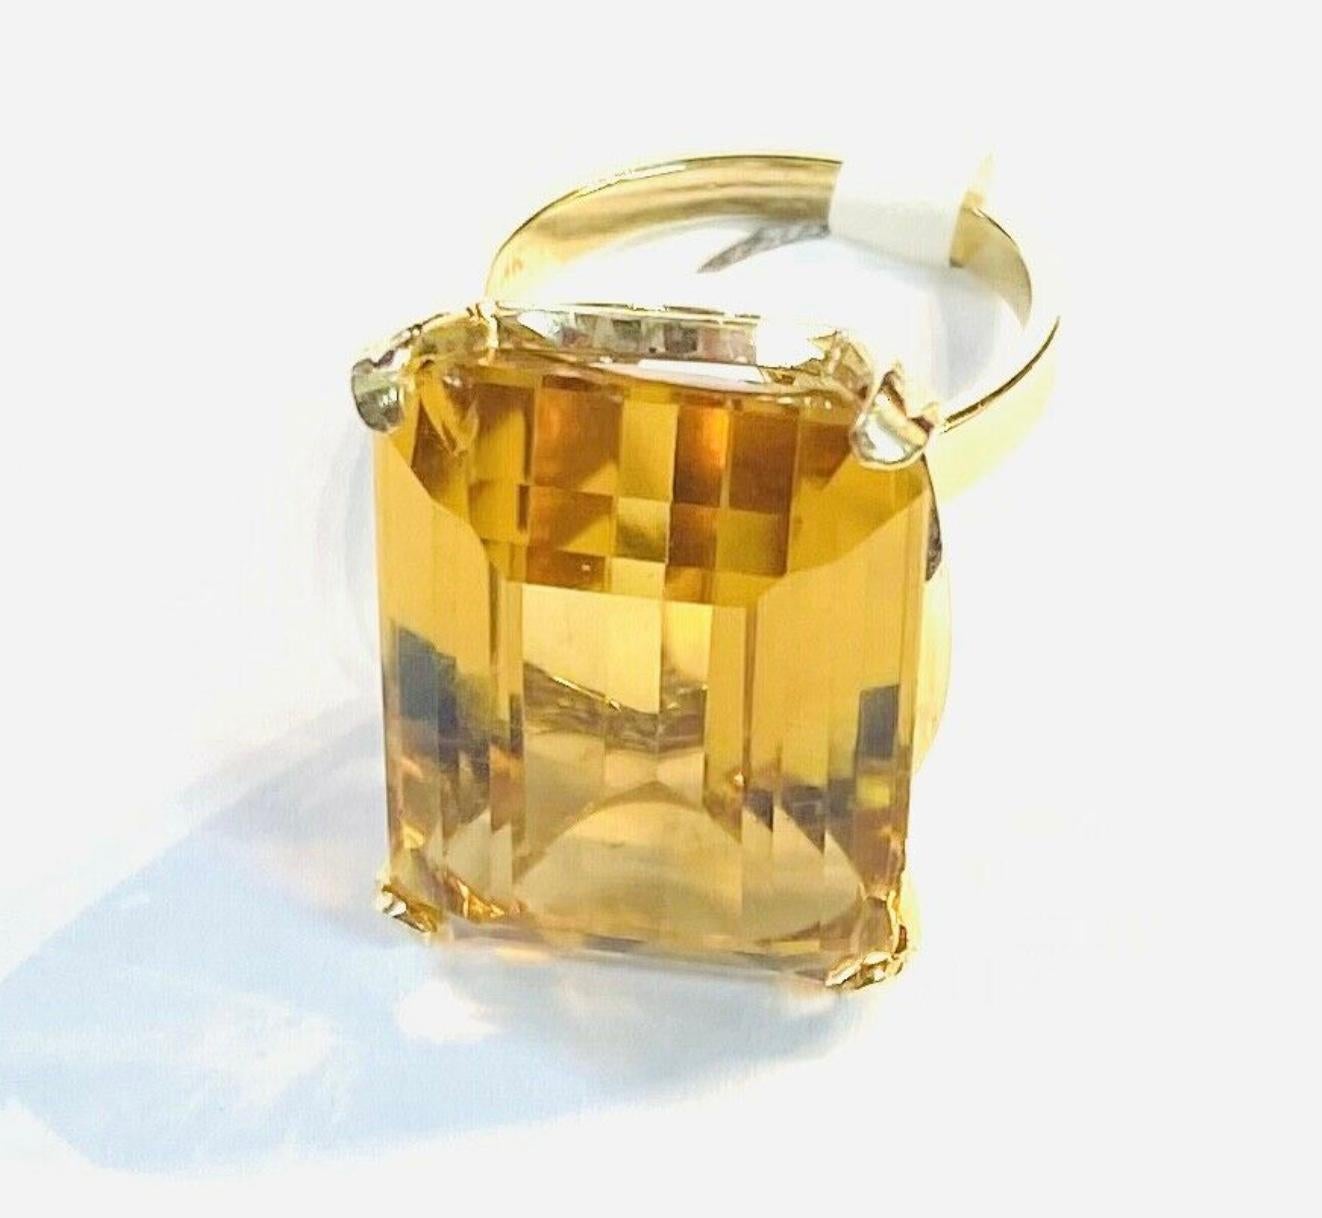 14k yellow gold emerald cut Citrine ring, 9.79 Grams TW. The dimensions of the emerald cut citrine are approximately 15 mm x 20 mm. Approximately 15 carats. Marked 14k. Approximate size 6.0.